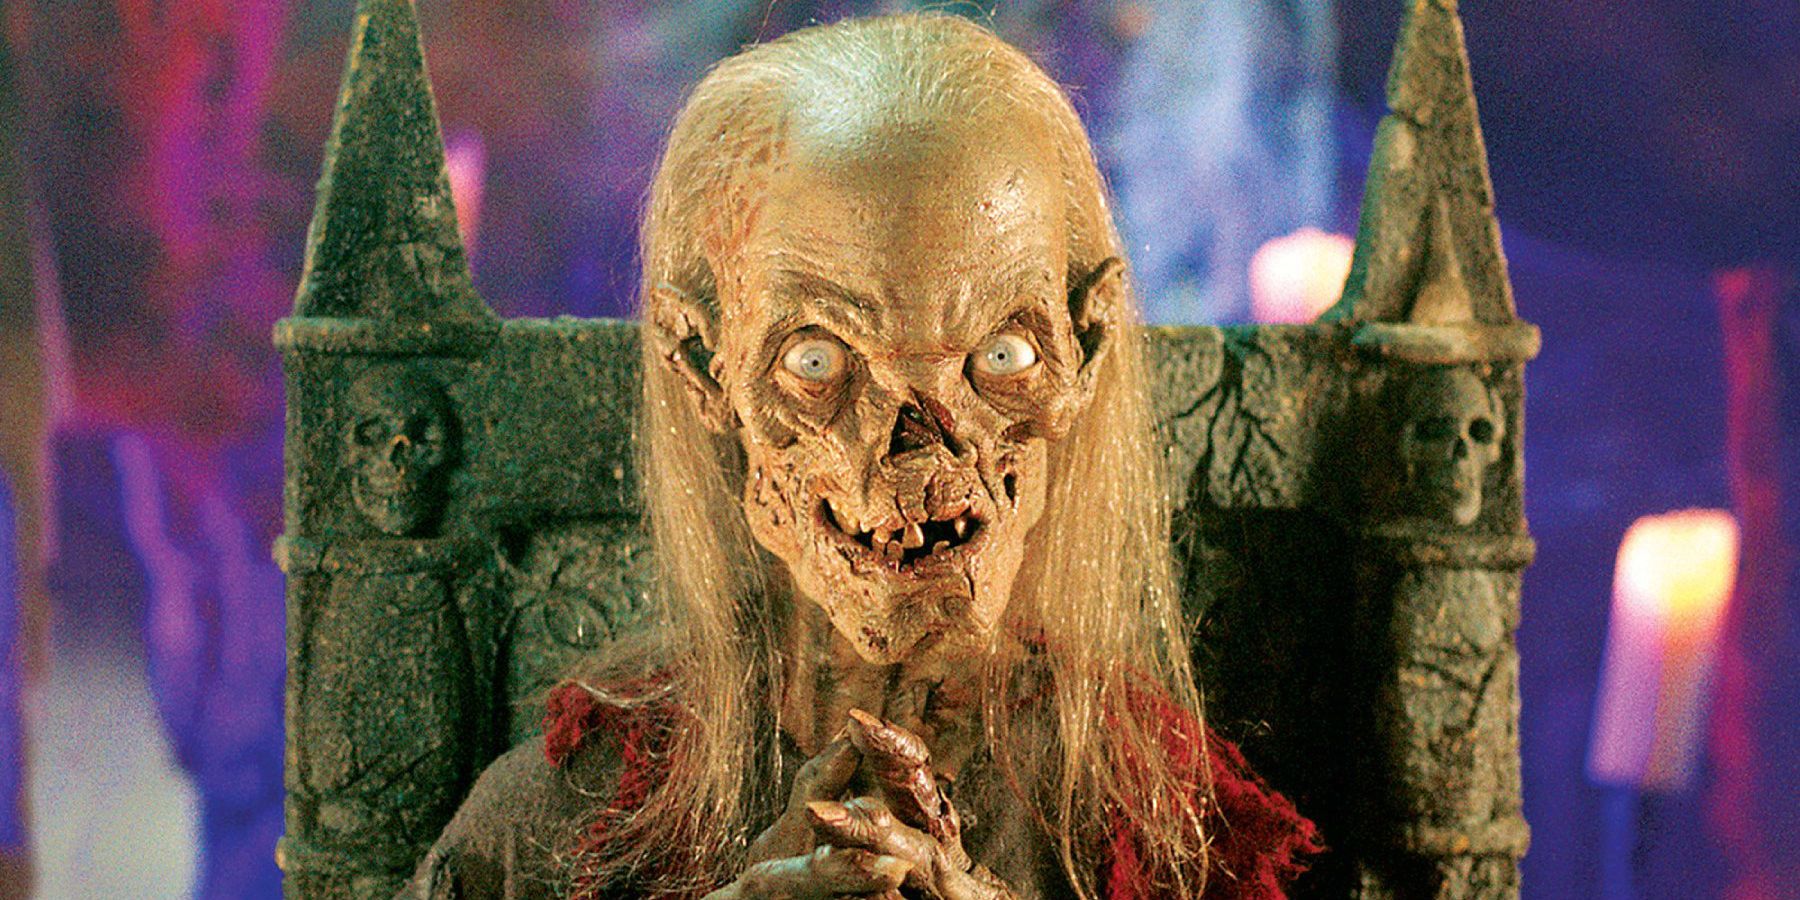 Every Tales from the Crypt Season 1 Episode Ranked Worst to Best